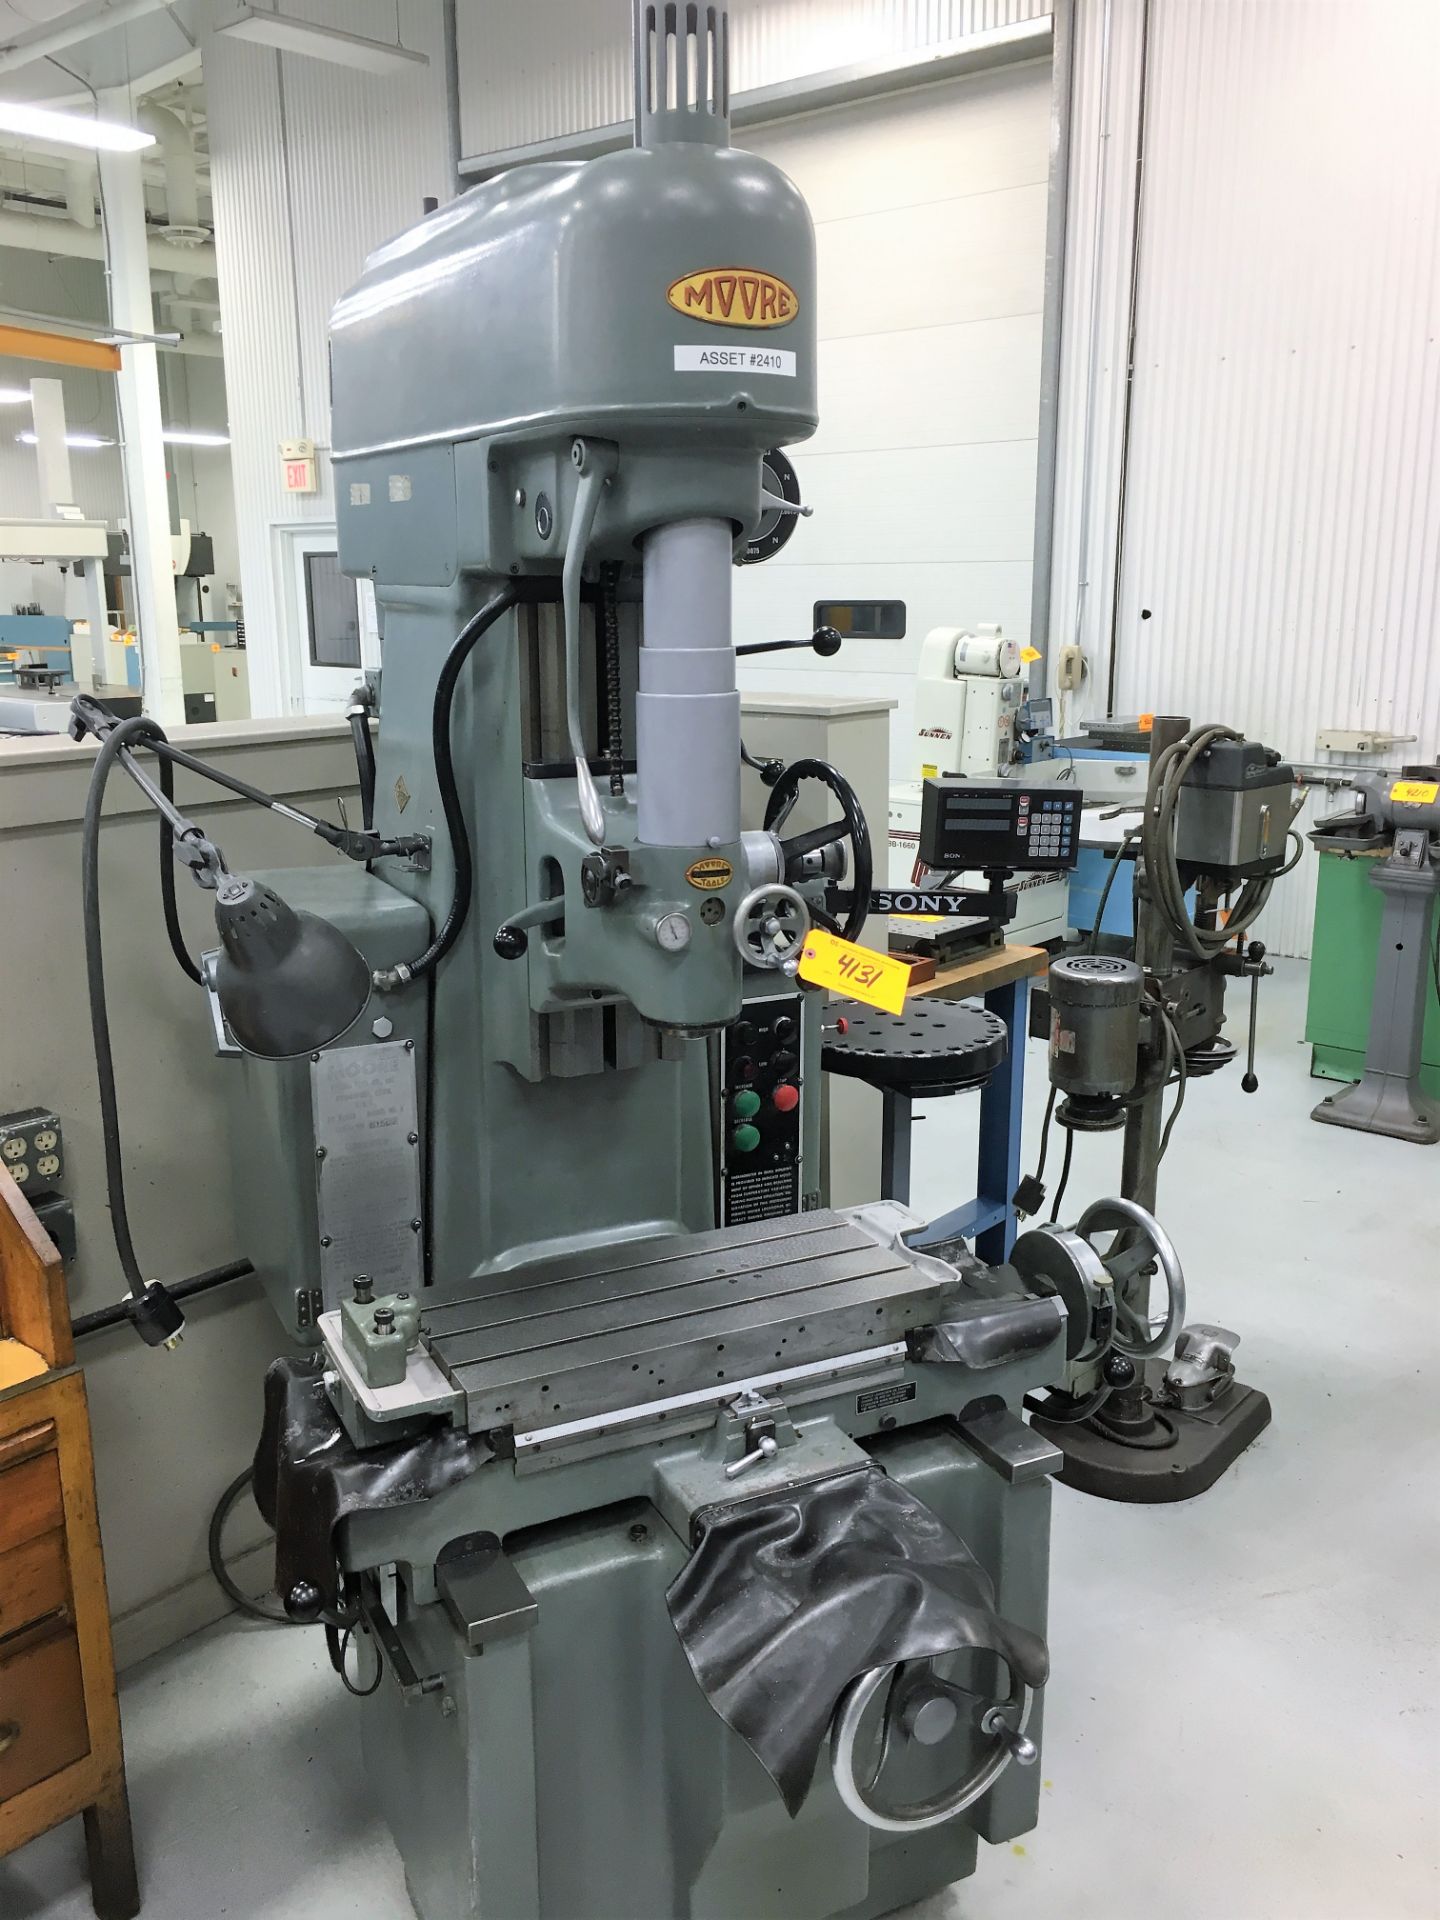 MOORE # 3 JIG BORER WITH 11'' X 24'' TABLE, SONY TWO-AXIS DIGITAL READOUT, S/N B-1569 (RECENTLY RE-